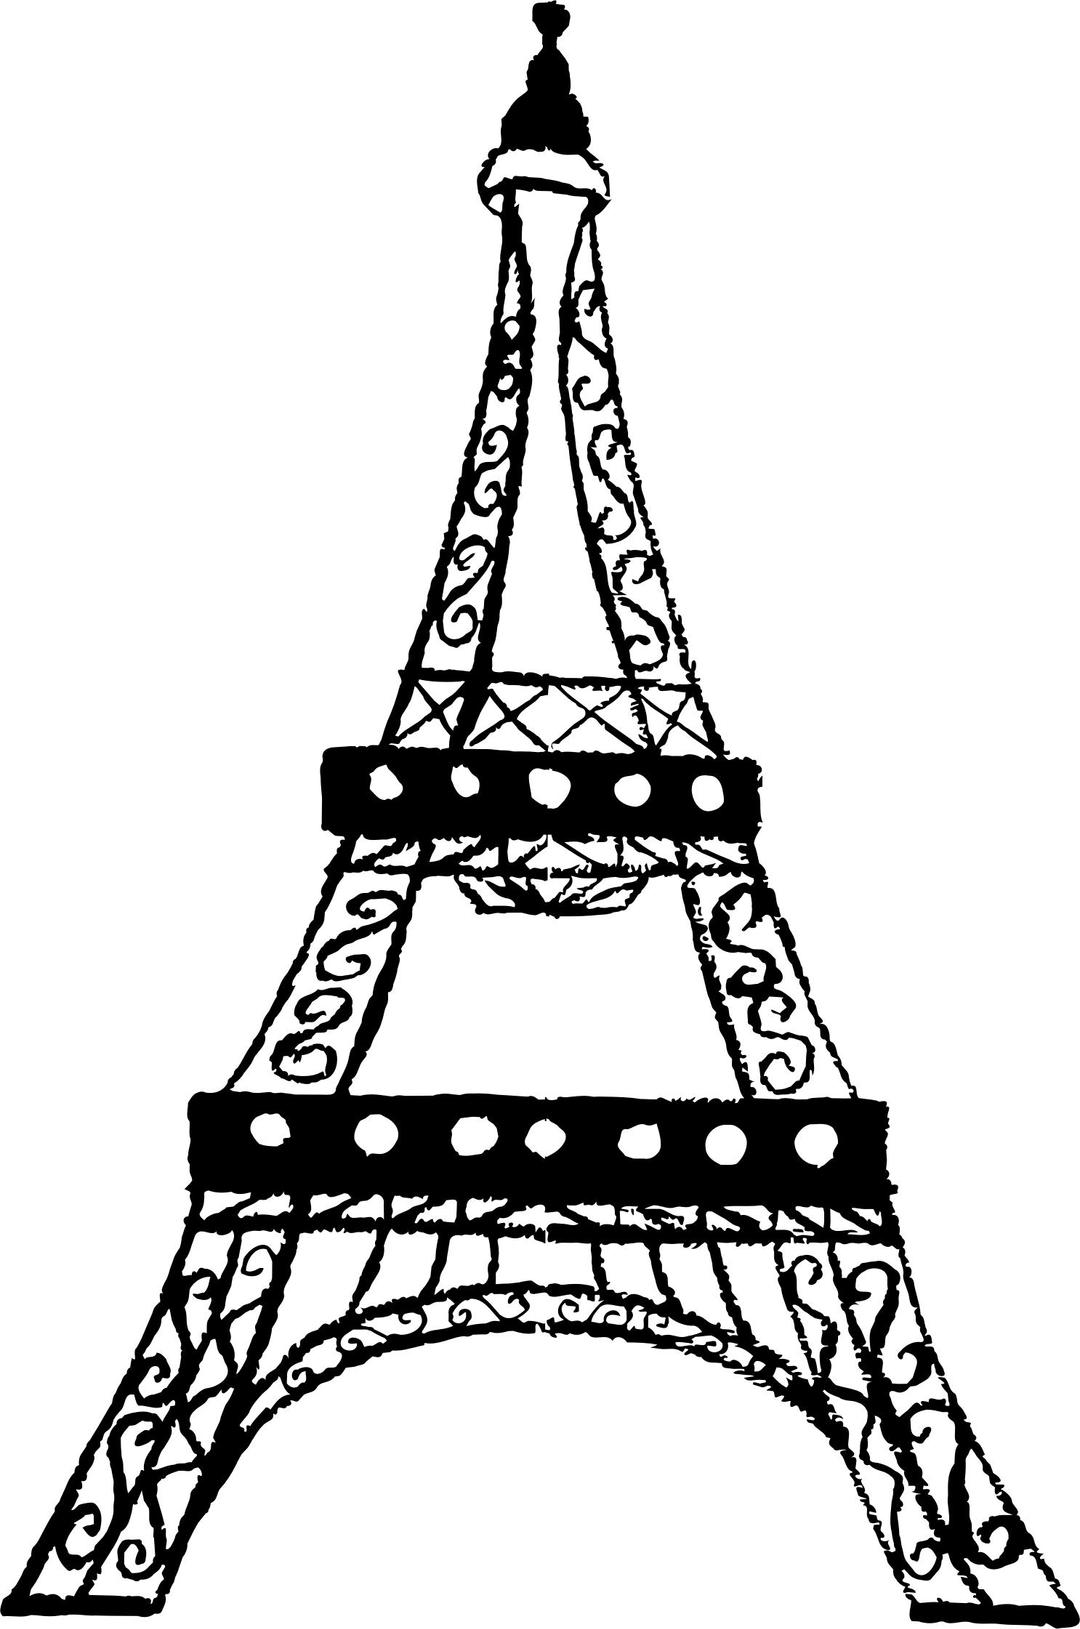 Eiffel Tower Charcoal Sketch png transparent